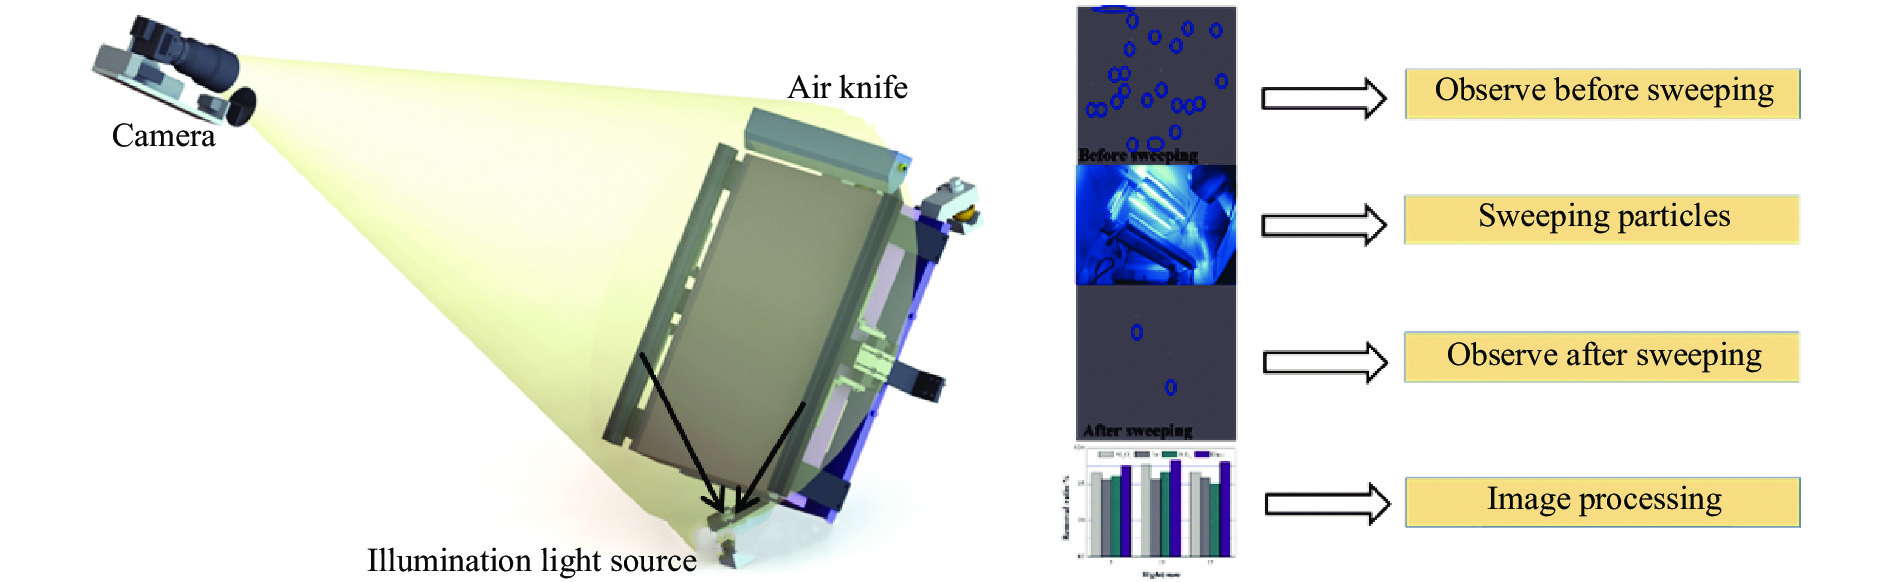 Experimental setup for surface contamination of reflector removal by air knife sweeping and its flow chart